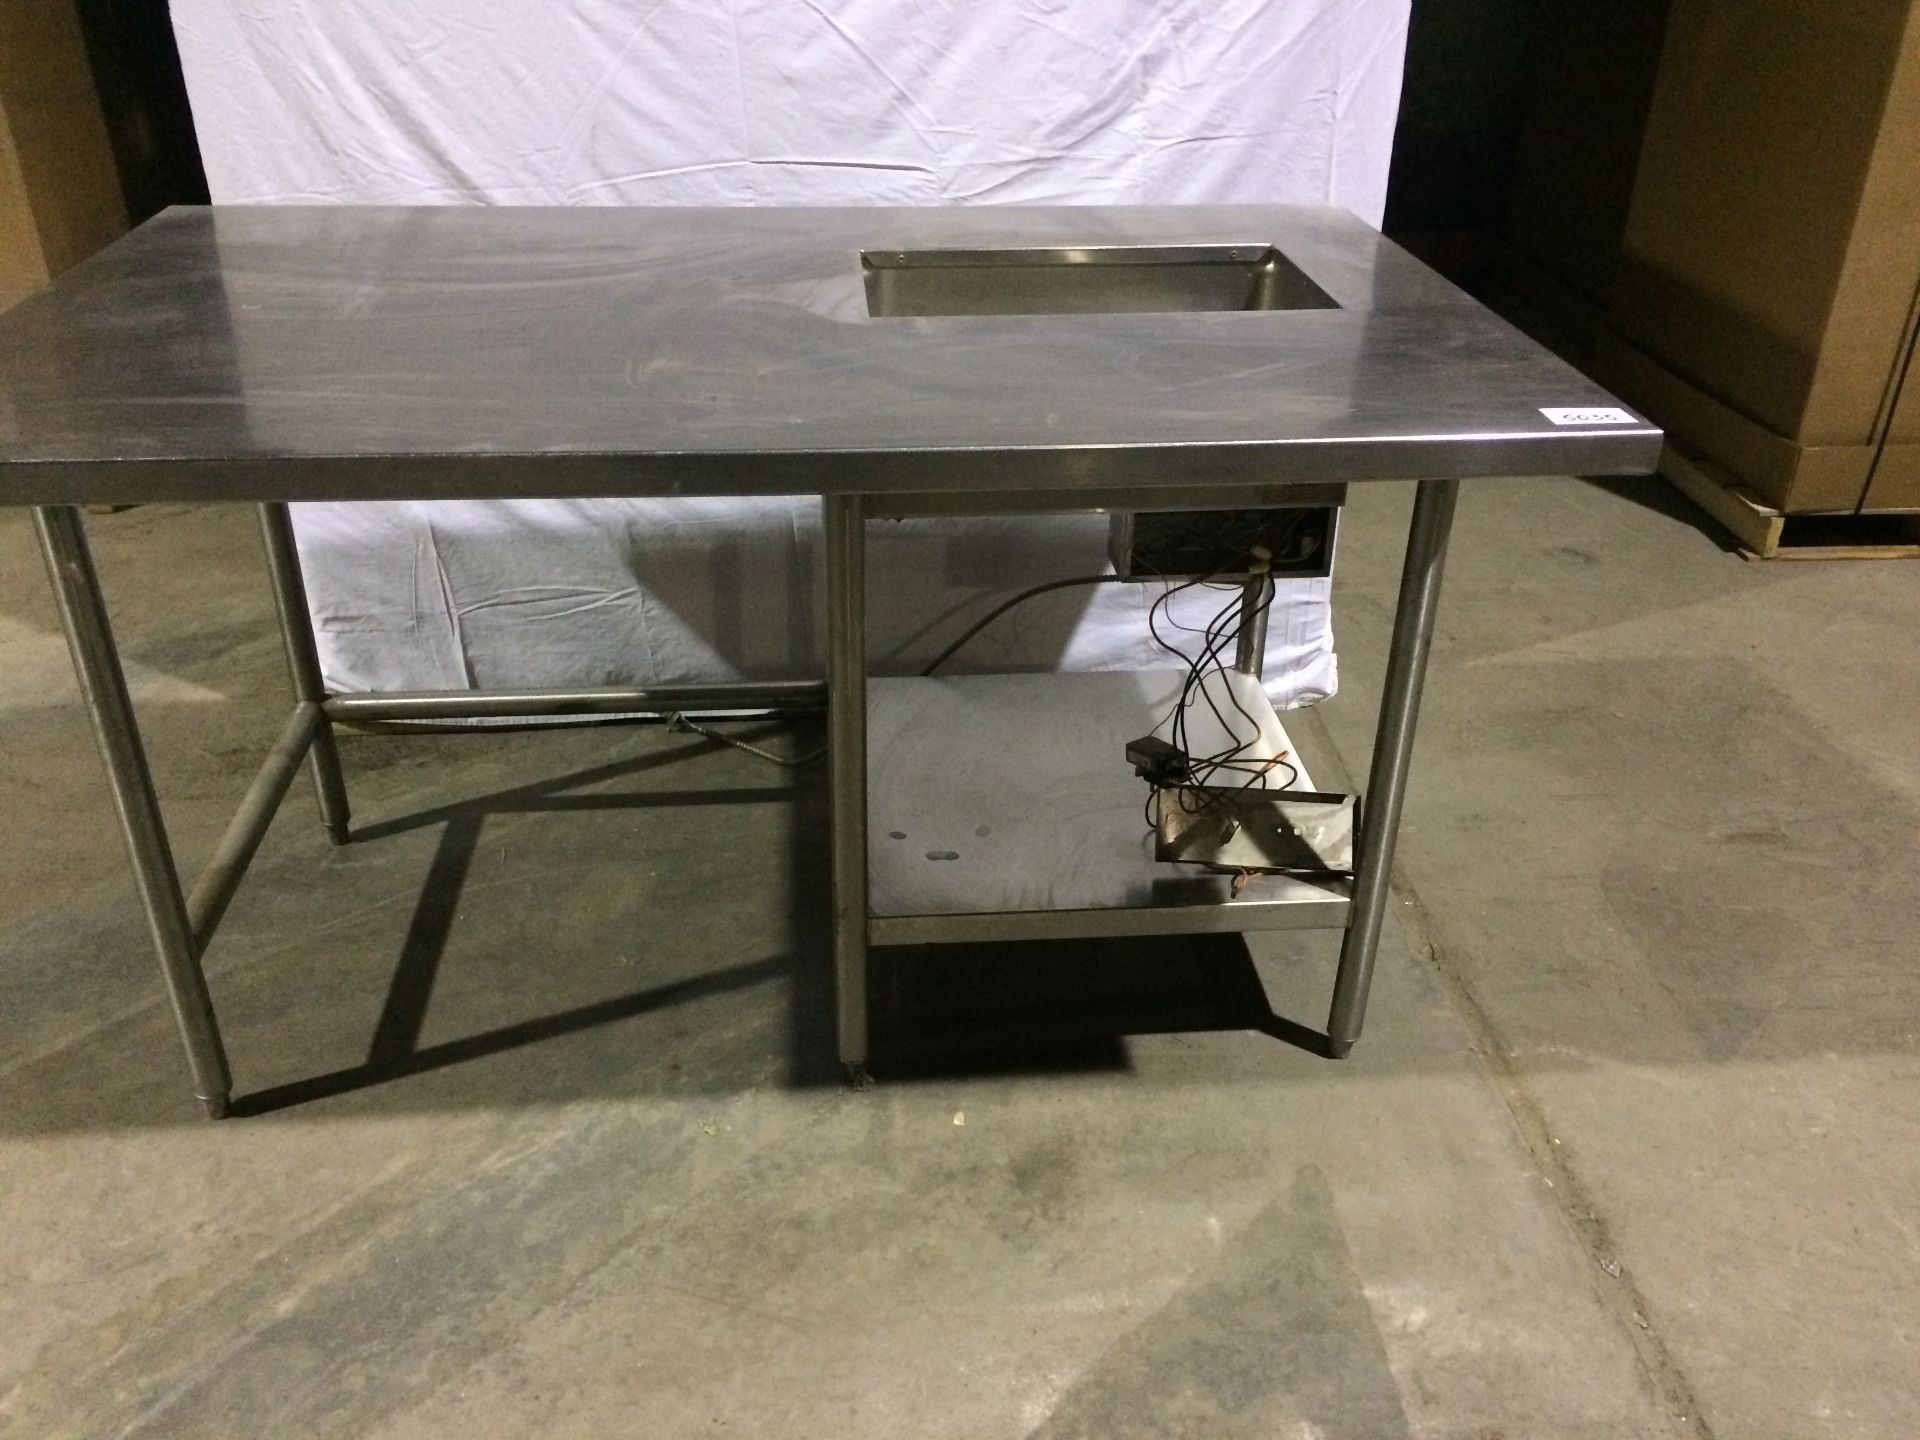 Custom S/S Table c/w cut out and drain